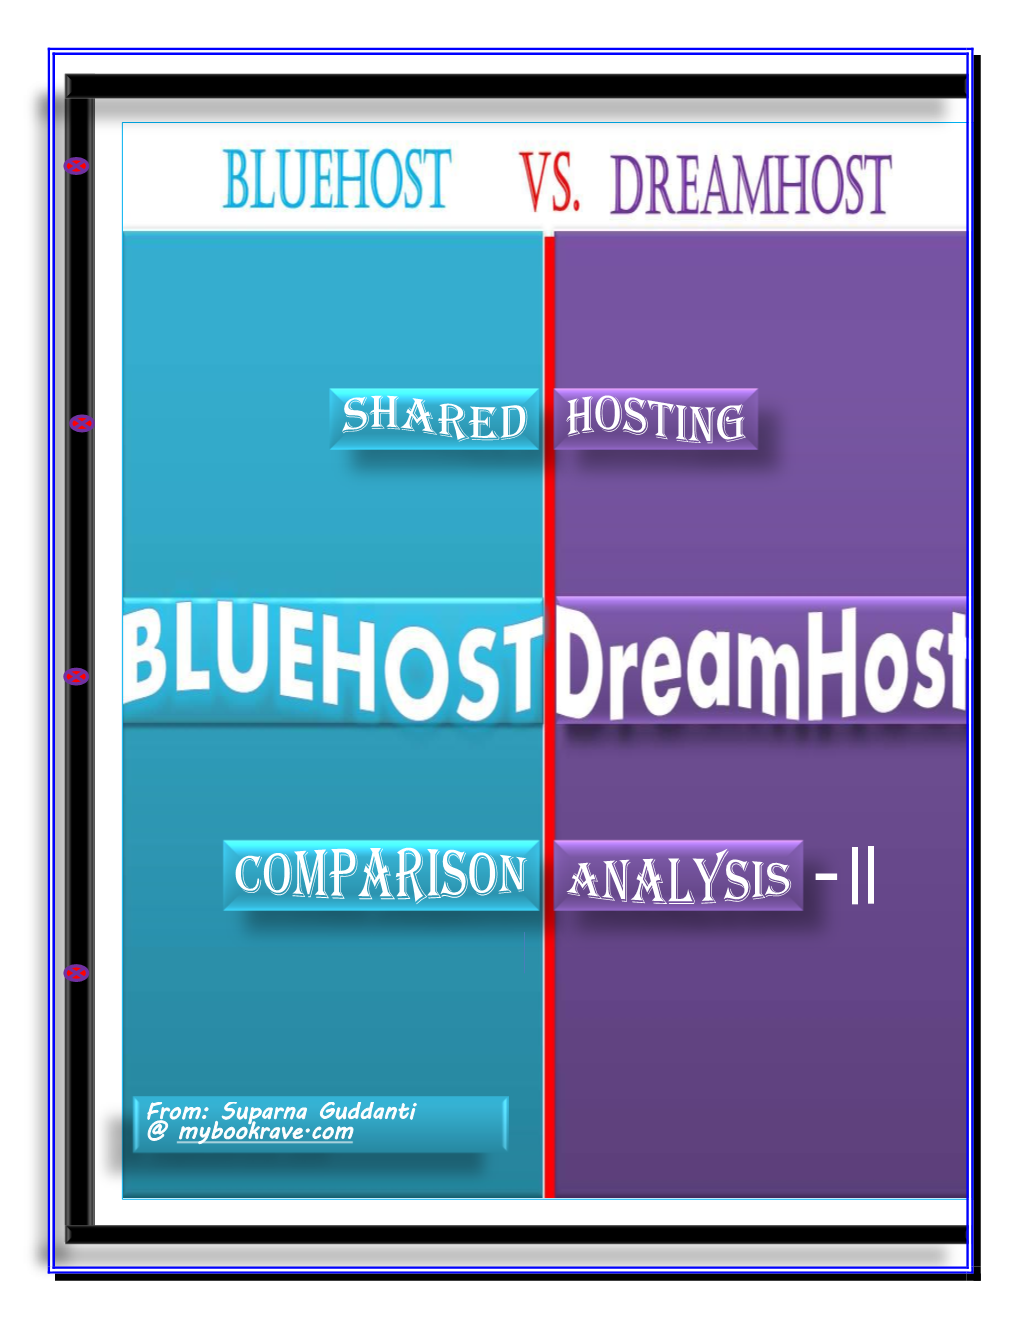 Bluehost Vs. Dreamhost Shared Hosting Comparison Analysis-II Table of Contents